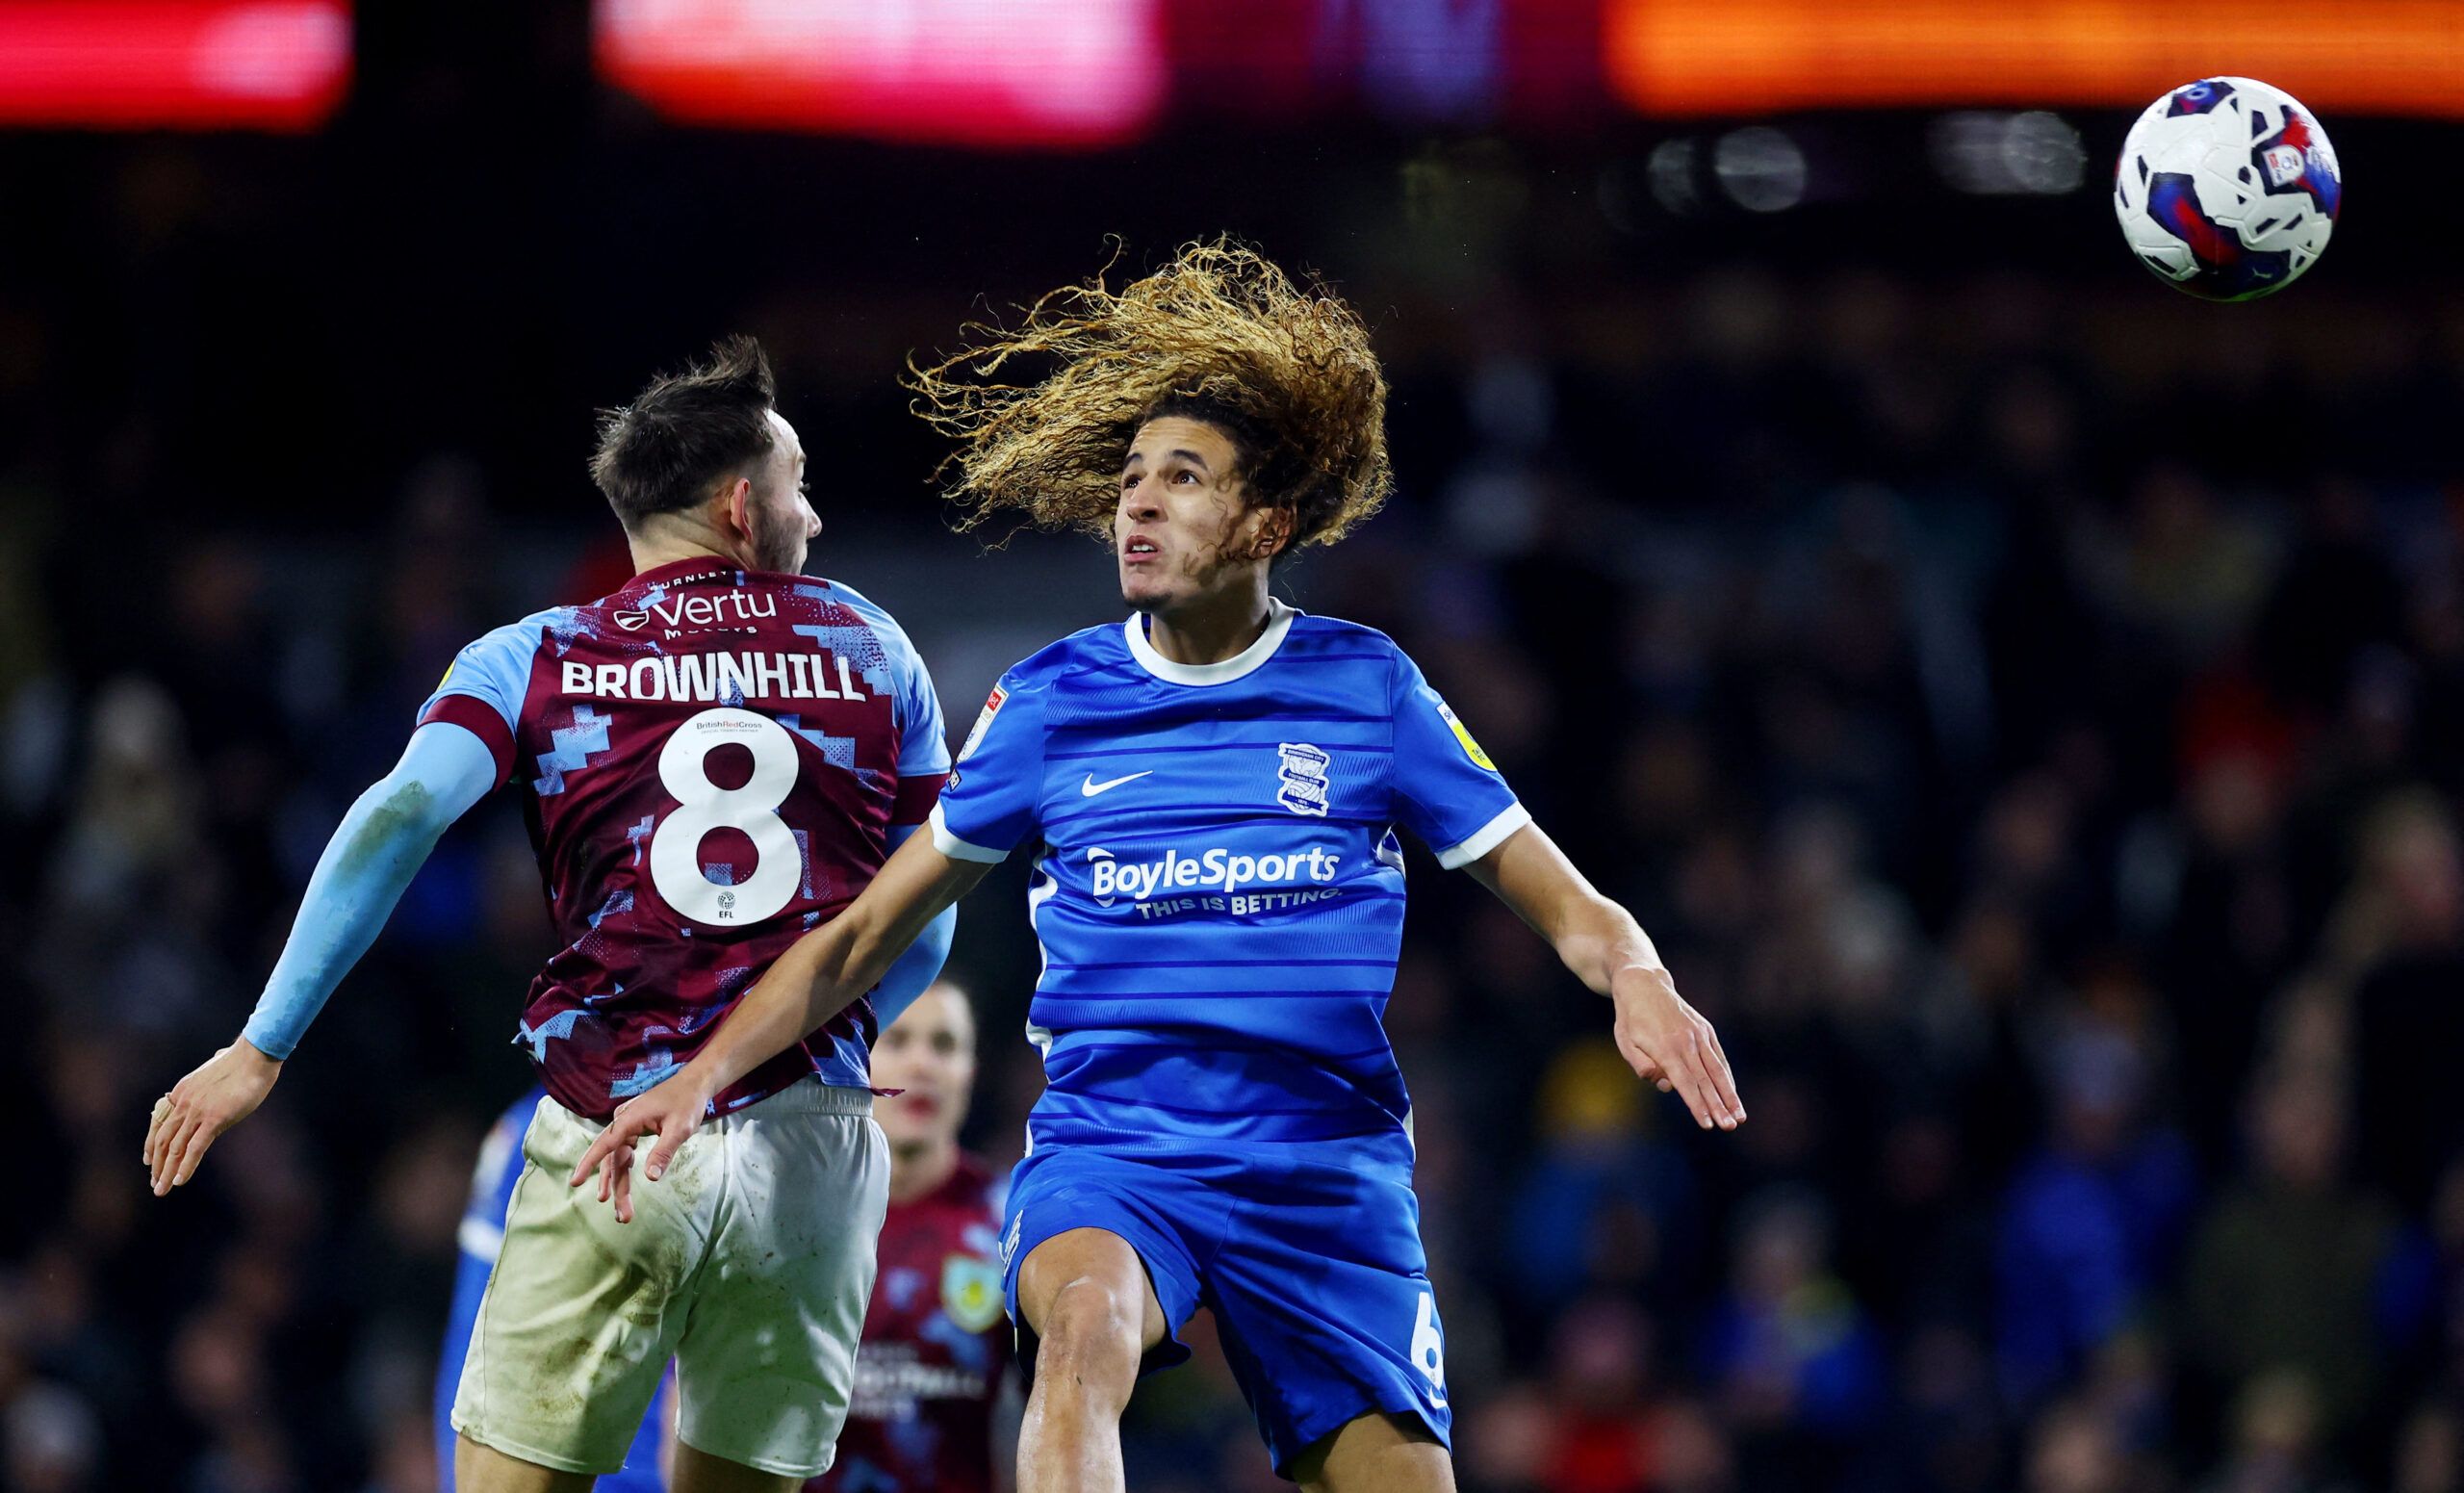 Soccer Football - Championship - Burnley v Birmingham City - Turf Moor, Burnley, Britain - December 27, 2022  Birmingham City's Hannibal Mejbri in action with Burnley's Josh Brownhill Action Images/Lee Smith EDITORIAL USE ONLY. No use with unauthorized audio, video, data, fixture lists, club/league logos or 'live' services. Online in-match use limited to 75 images, no video emulation. No use in betting, games or single club /league/player publications.  Please contact your account representative